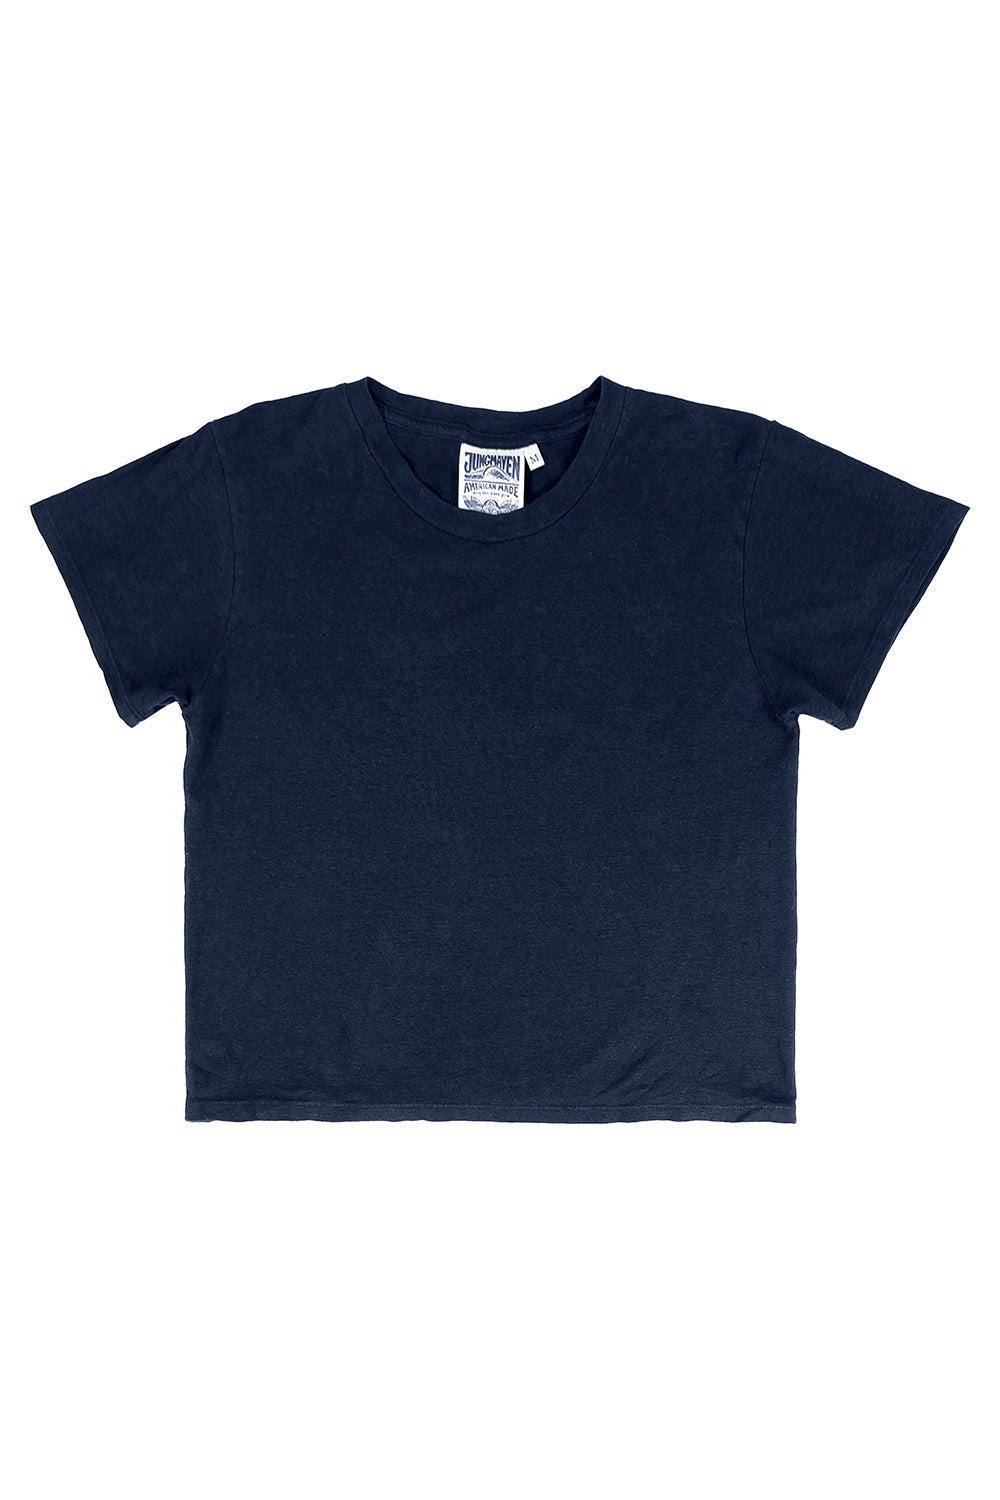 Cropped Lorel Tee | Jungmaven Hemp Clothing & Accessories / Color: Navy